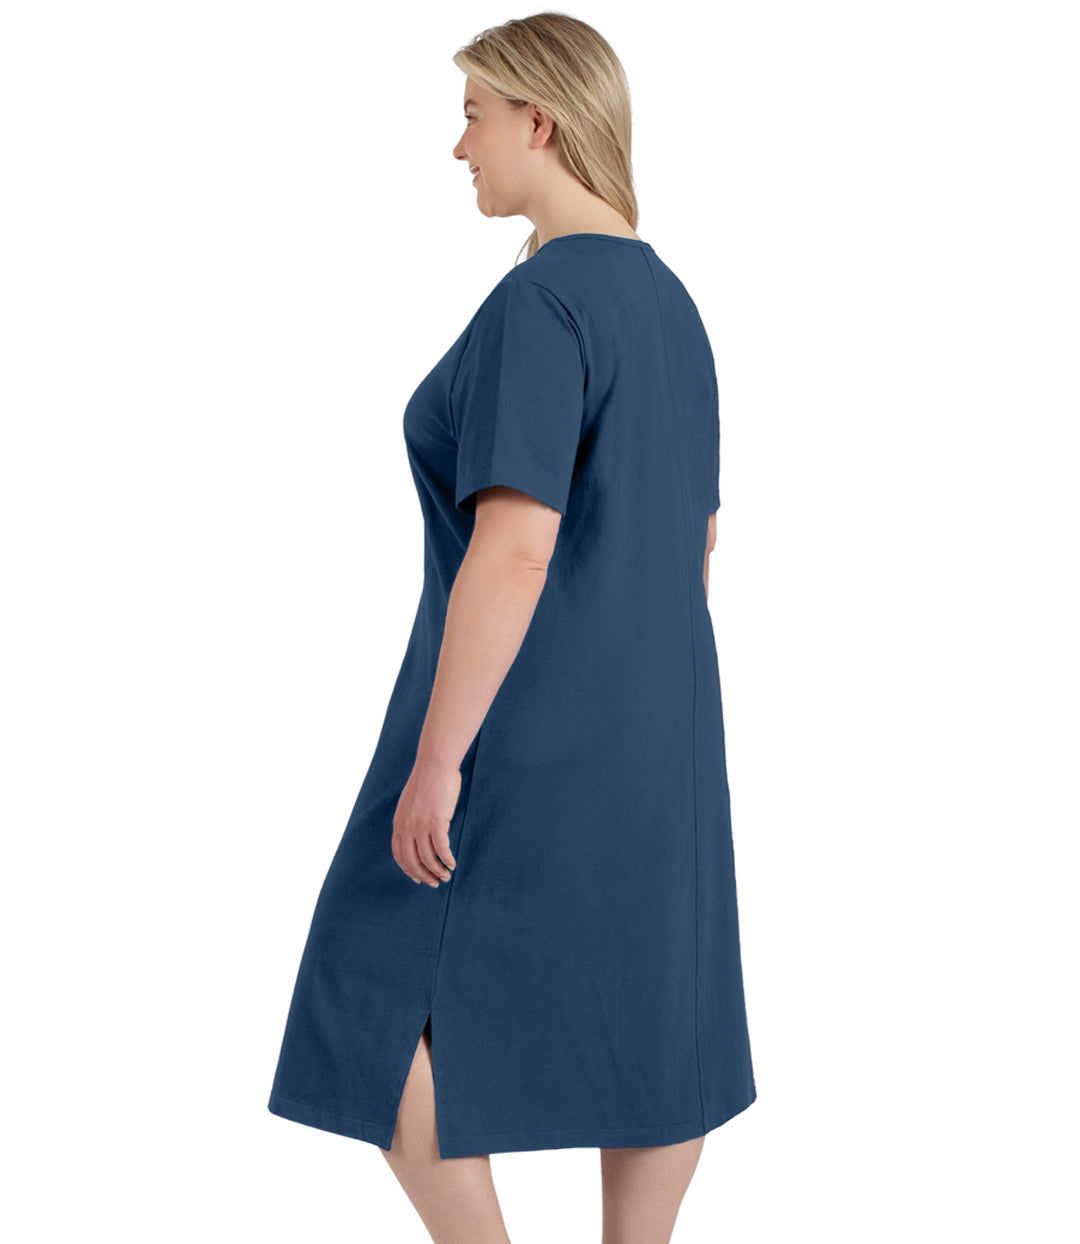 Plus size woman, facing to the back, wearing JunoActive plus size Stretch Naturals Short Sleeve Dress in the color denim blue.